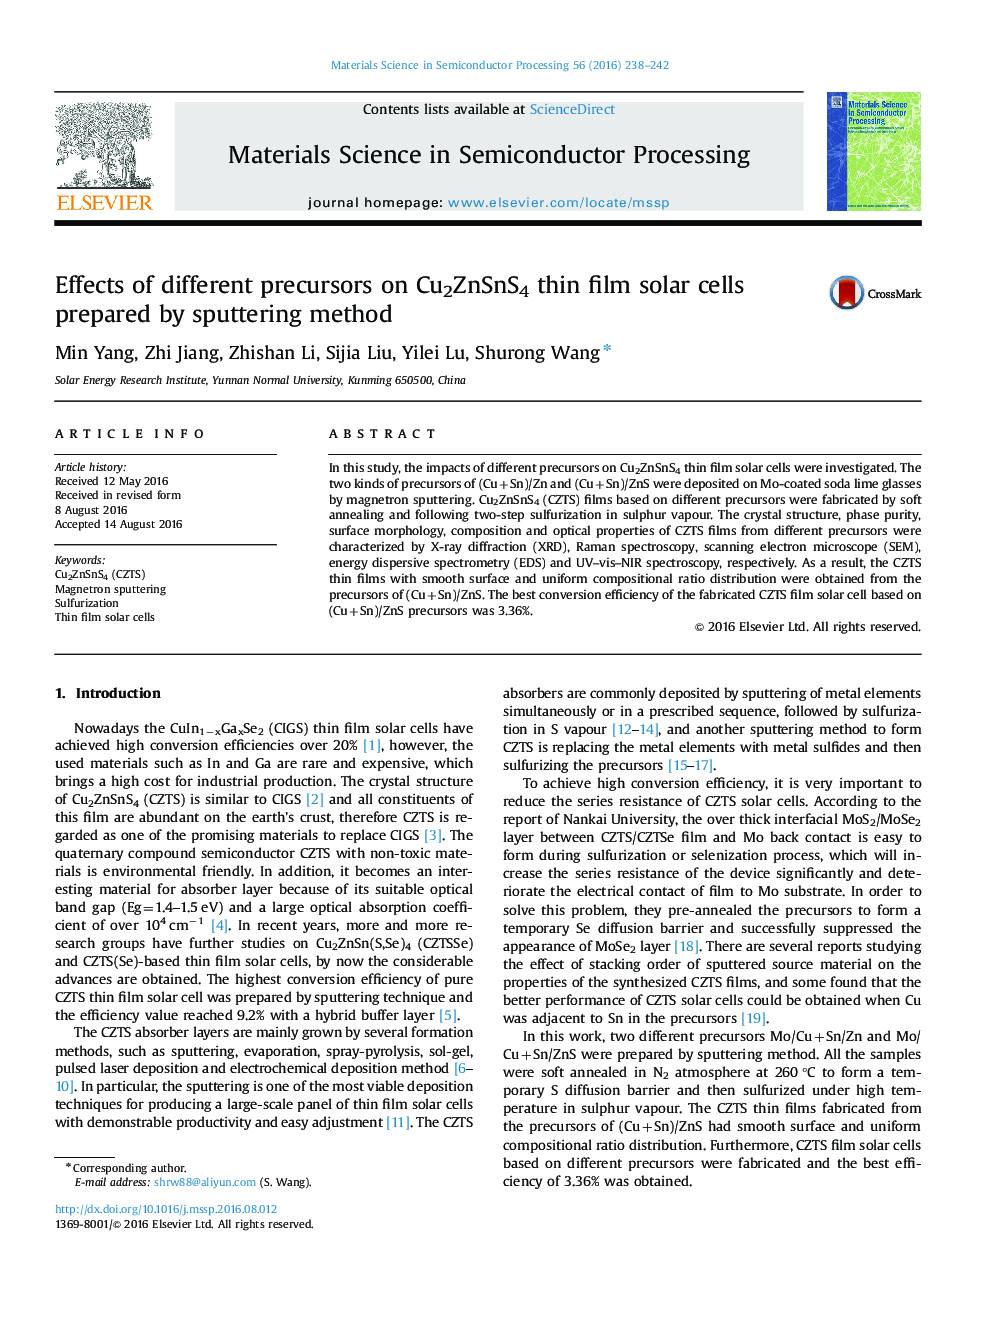 Effects of different precursors on Cu2ZnSnS4 thin film solar cells prepared by sputtering method